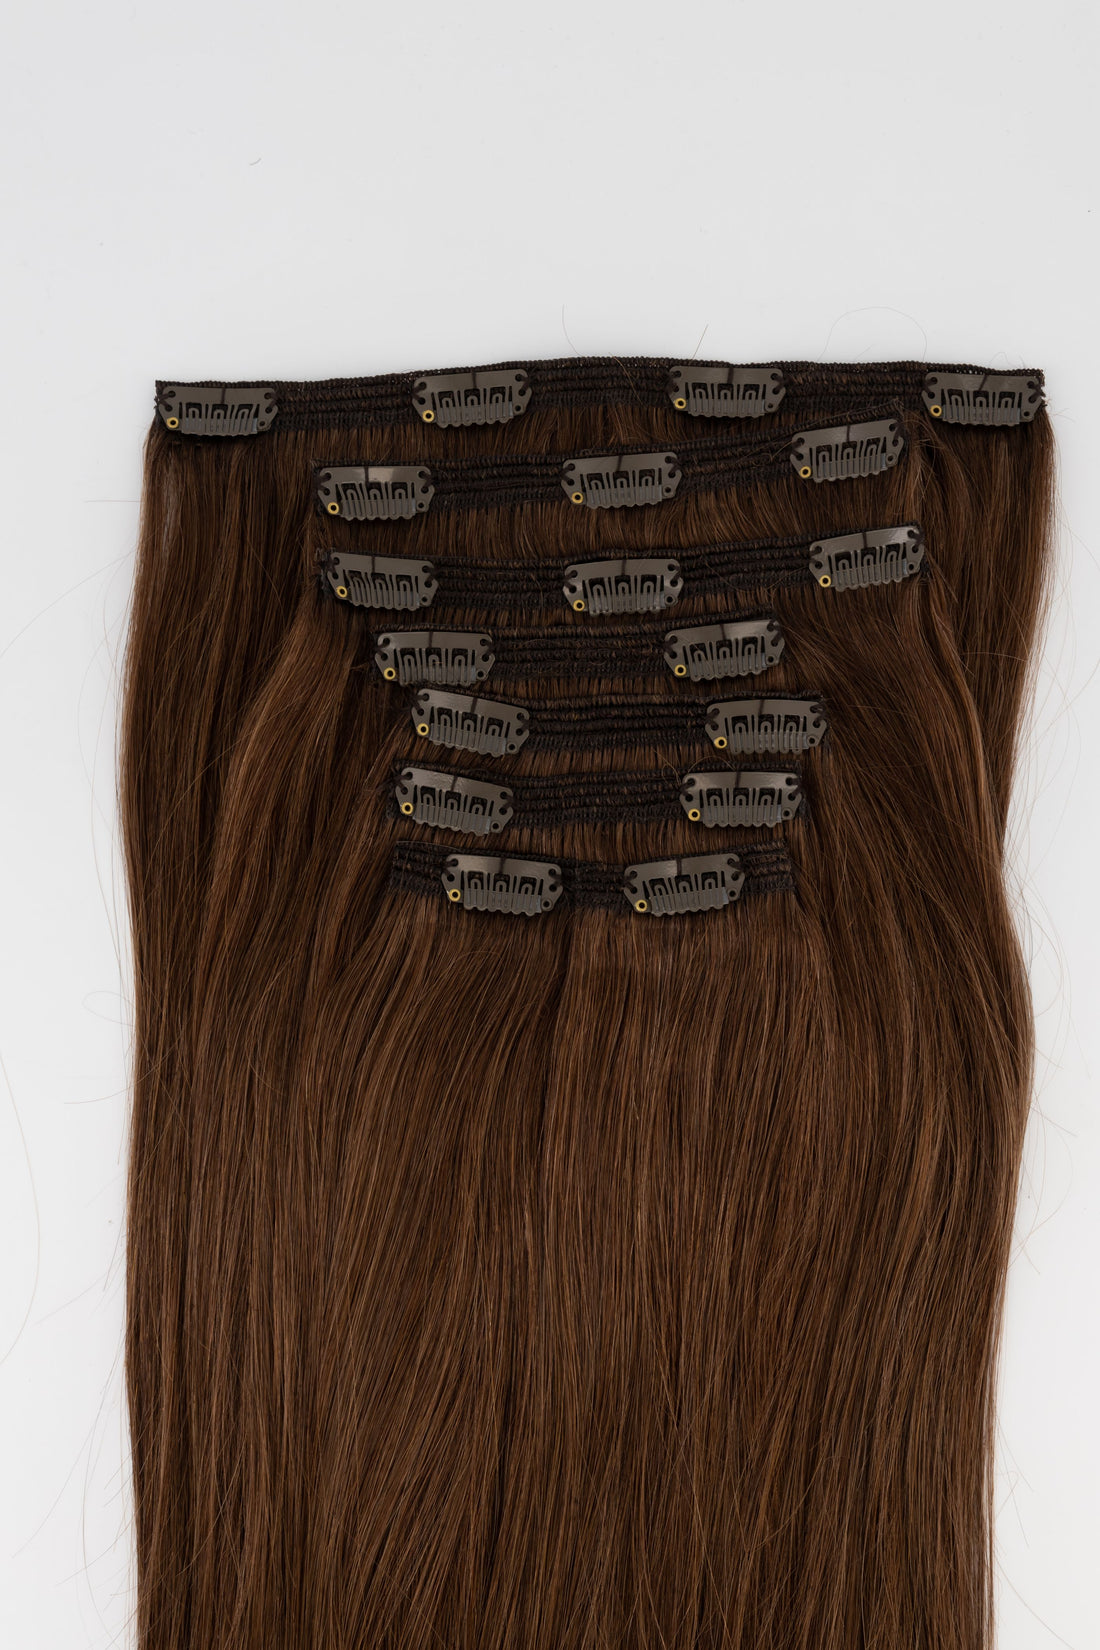 Frontrow clip-in hair extensions in chocolate brown